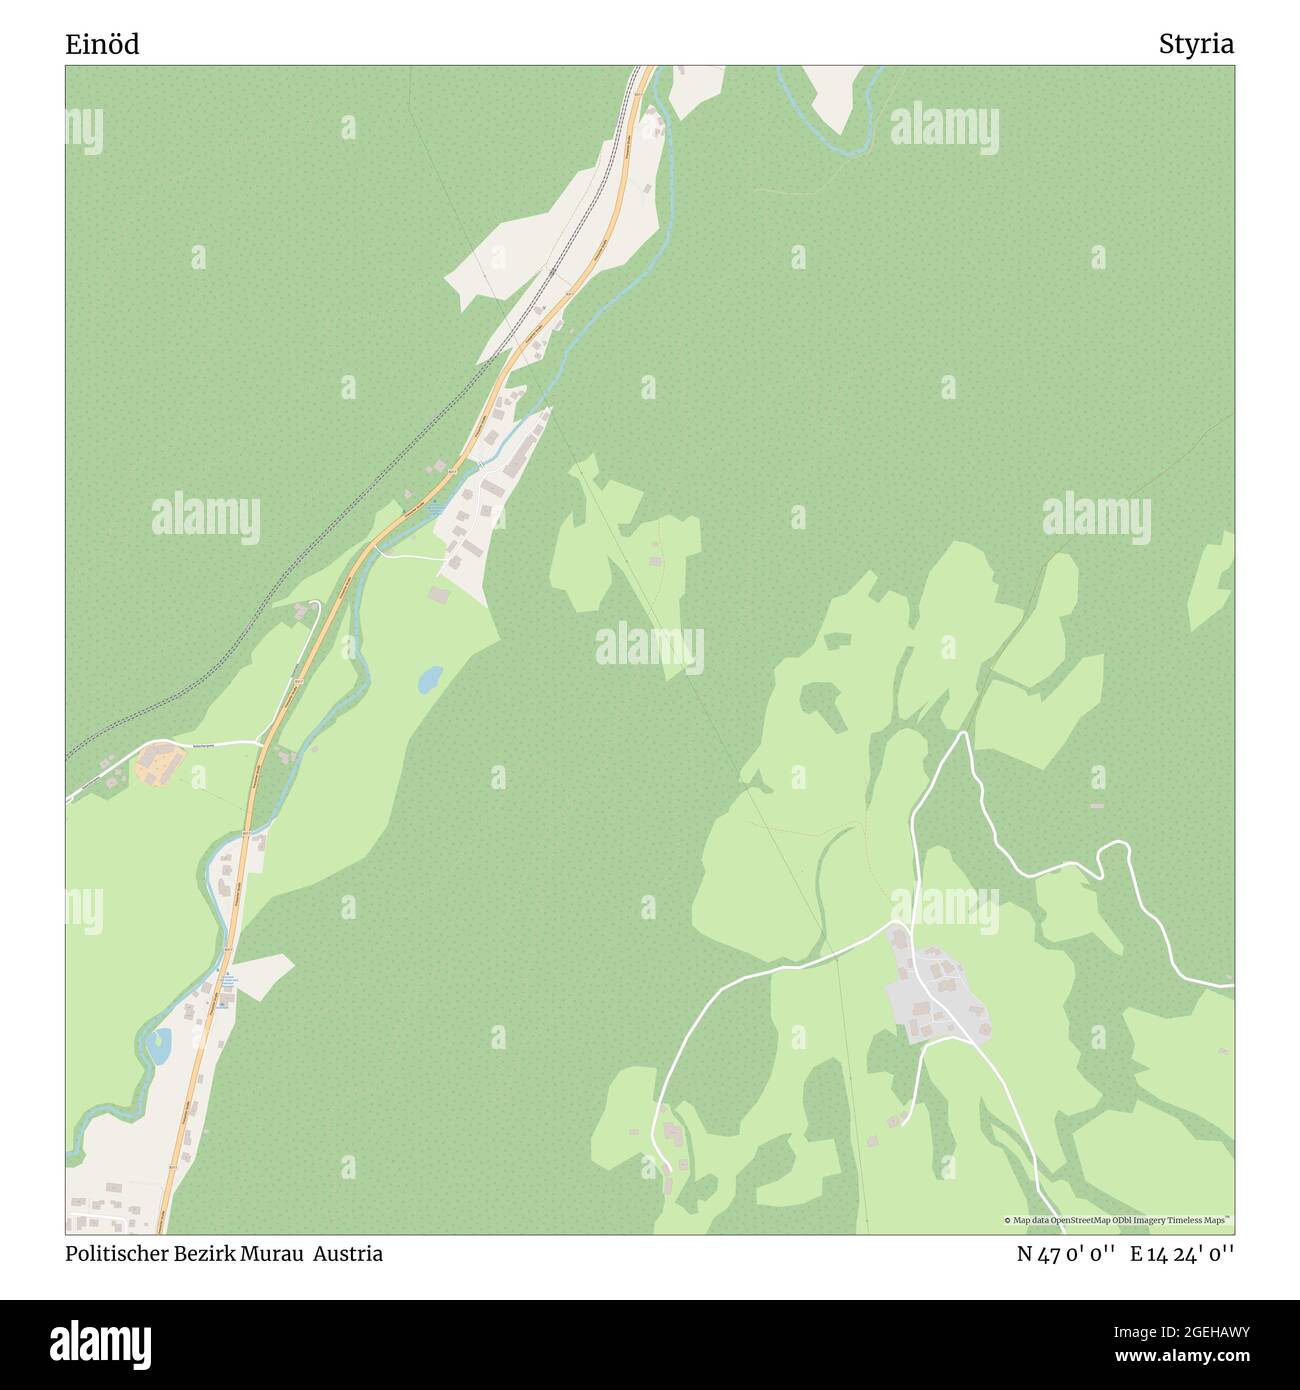 Einöd, Politischer Bezirk Murau, Austria, Styria, N 47 0' 0'', E 14 24' 0'', map, Timeless Map published in 2021. Travelers, explorers and adventurers like Florence Nightingale, David Livingstone, Ernest Shackleton, Lewis and Clark and Sherlock Holmes relied on maps to plan travels to the world's most remote corners, Timeless Maps is mapping most locations on the globe, showing the achievement of great dreams Stock Photo